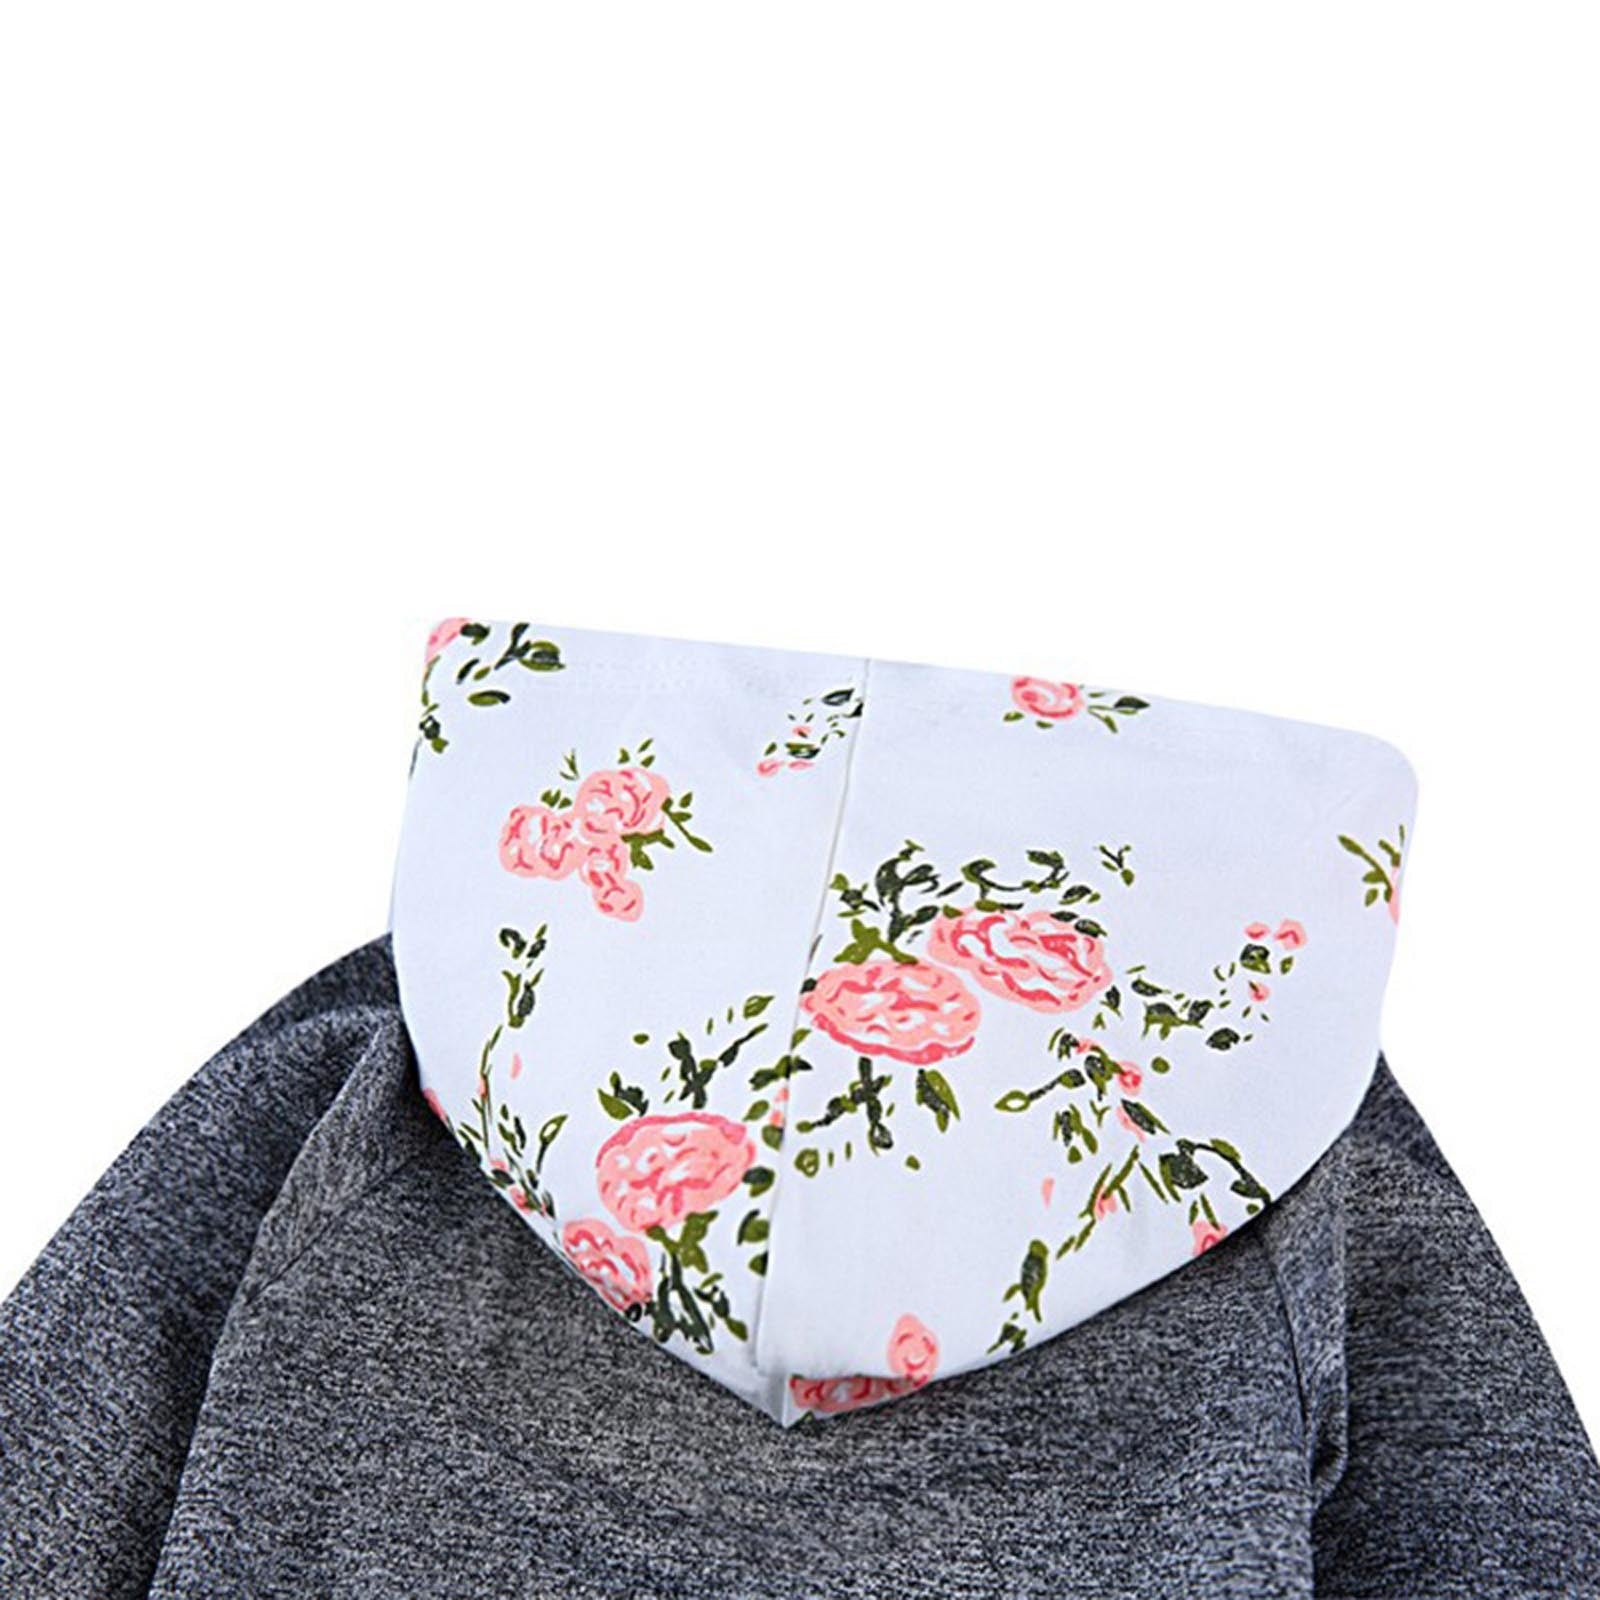 Newborn Clothes Fall/Winter Girls Flower Hoodies Hooded Sweater Pants Cotton Outfits